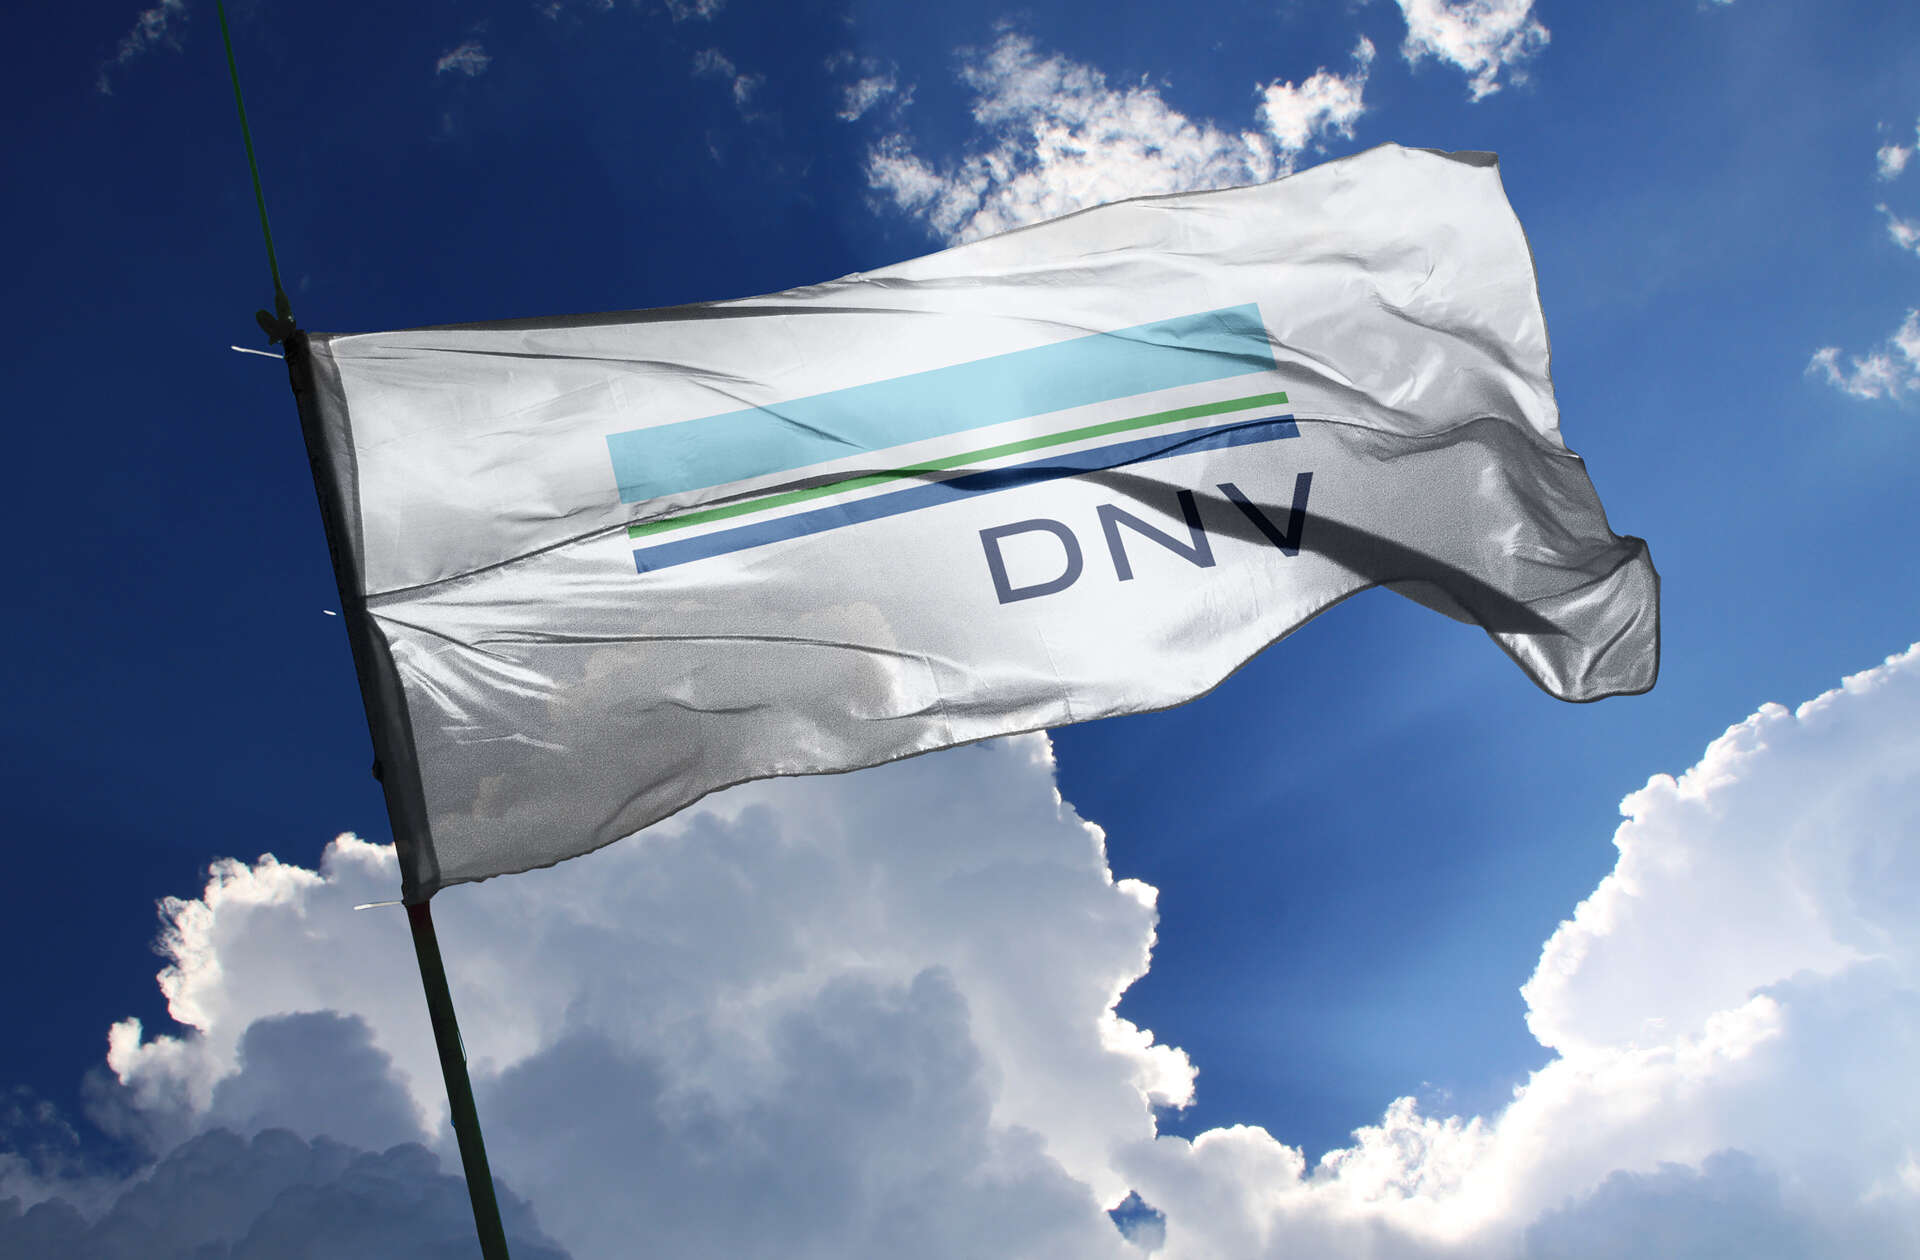 Classification society DNV drops GL from its name